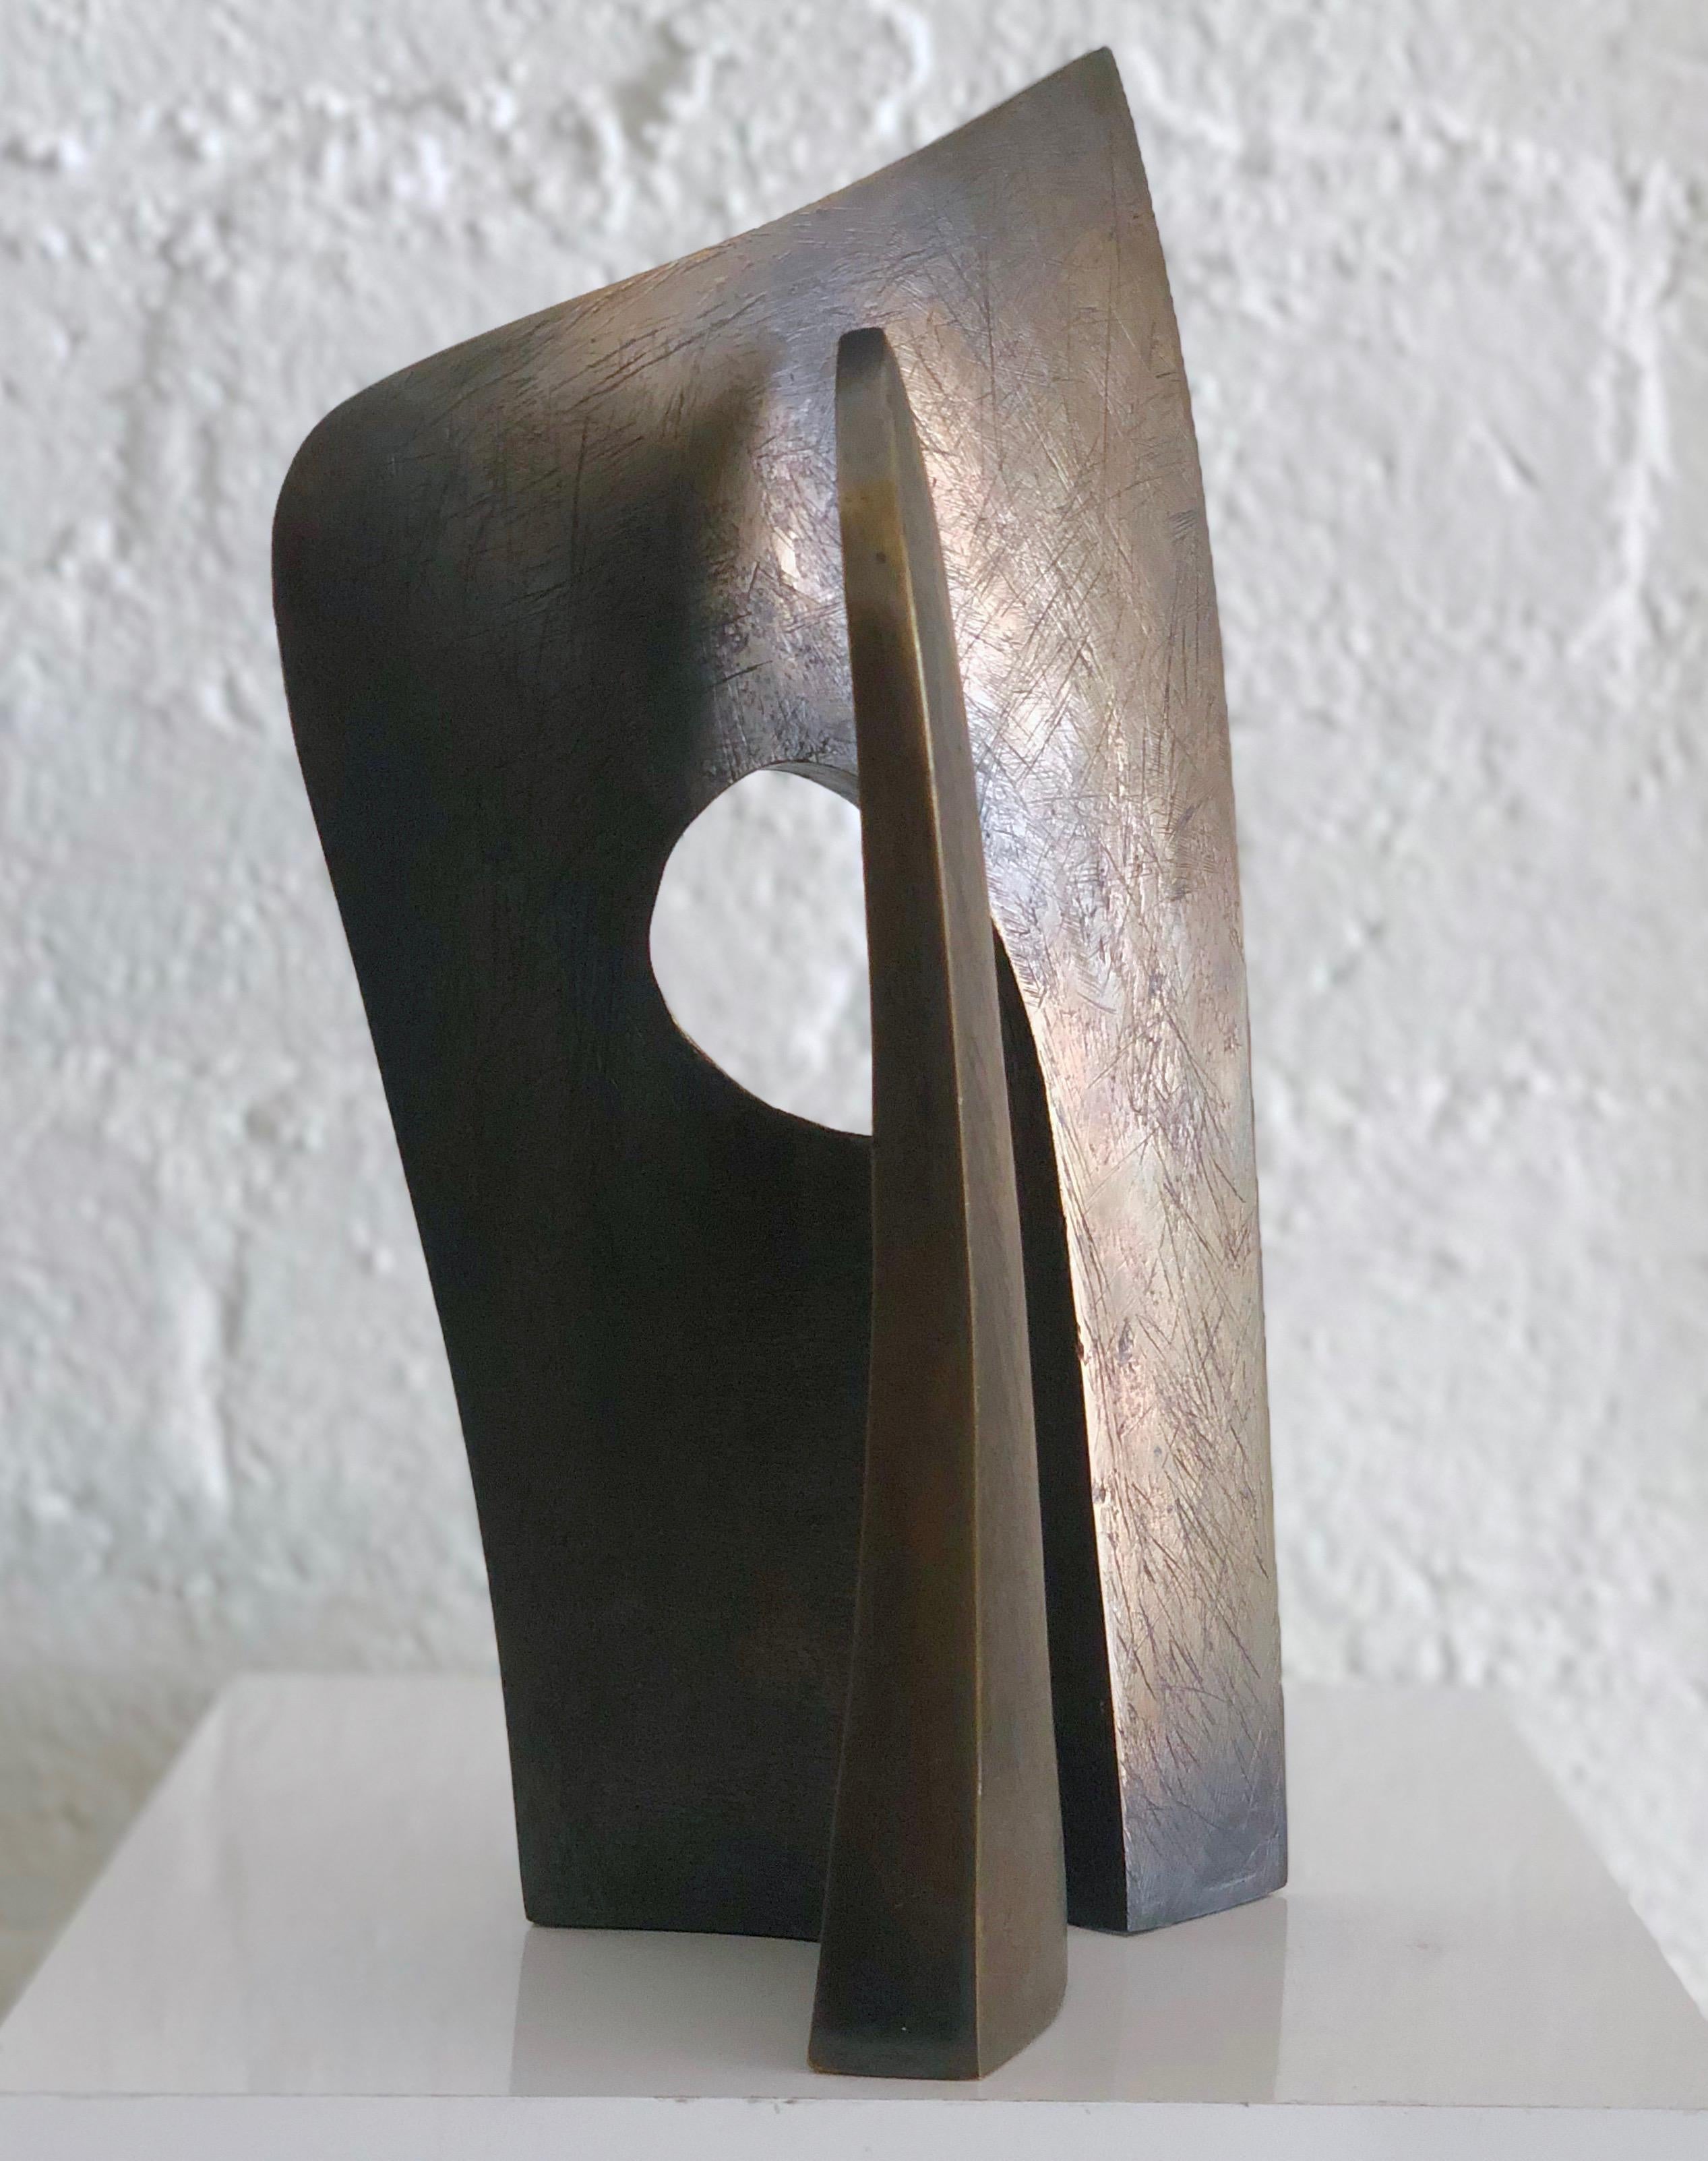 Late 20th Century Abstract Bronze Table Sculpture 1976 M. E. Lorenz